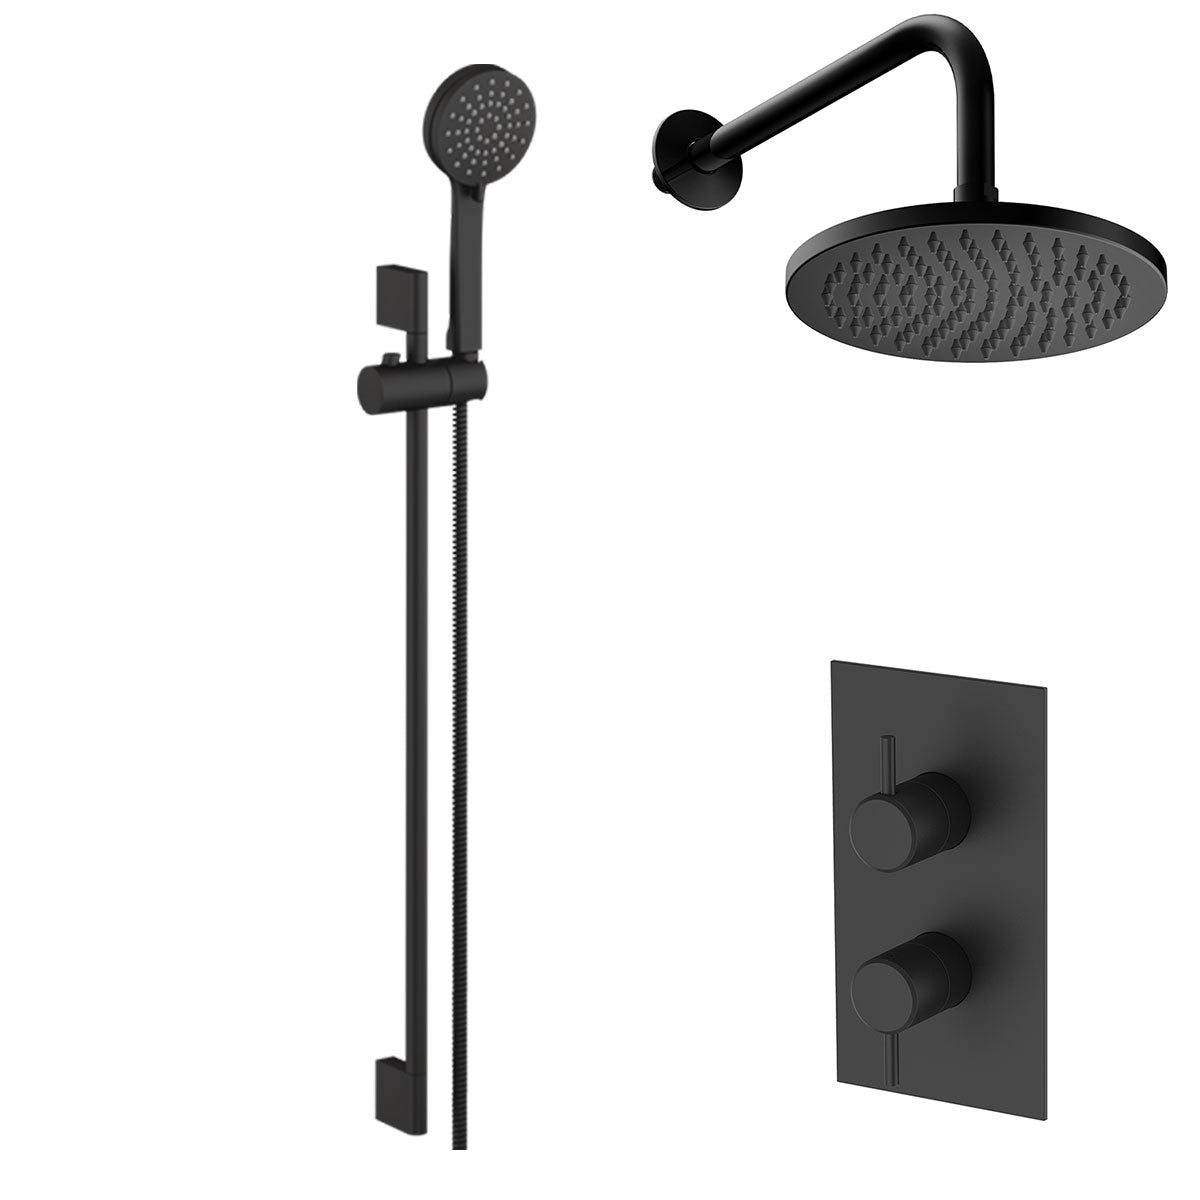 Hoxton Thermostatic Valve with Overhead Shower and Slide Rail Handset Black